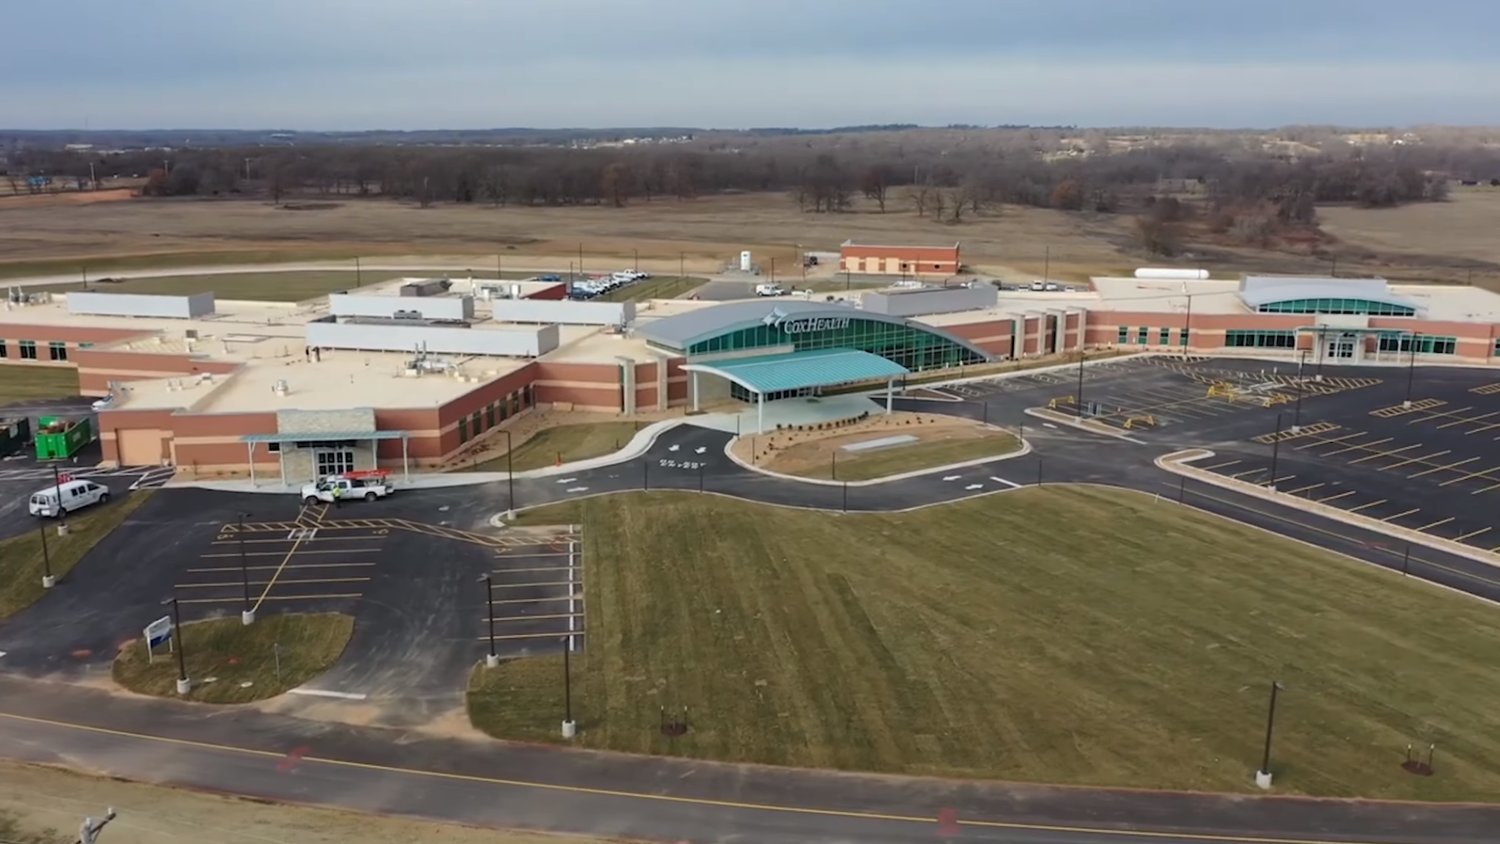 The new Cox Monett Hospital, a $42 million development, opened in early 2021.